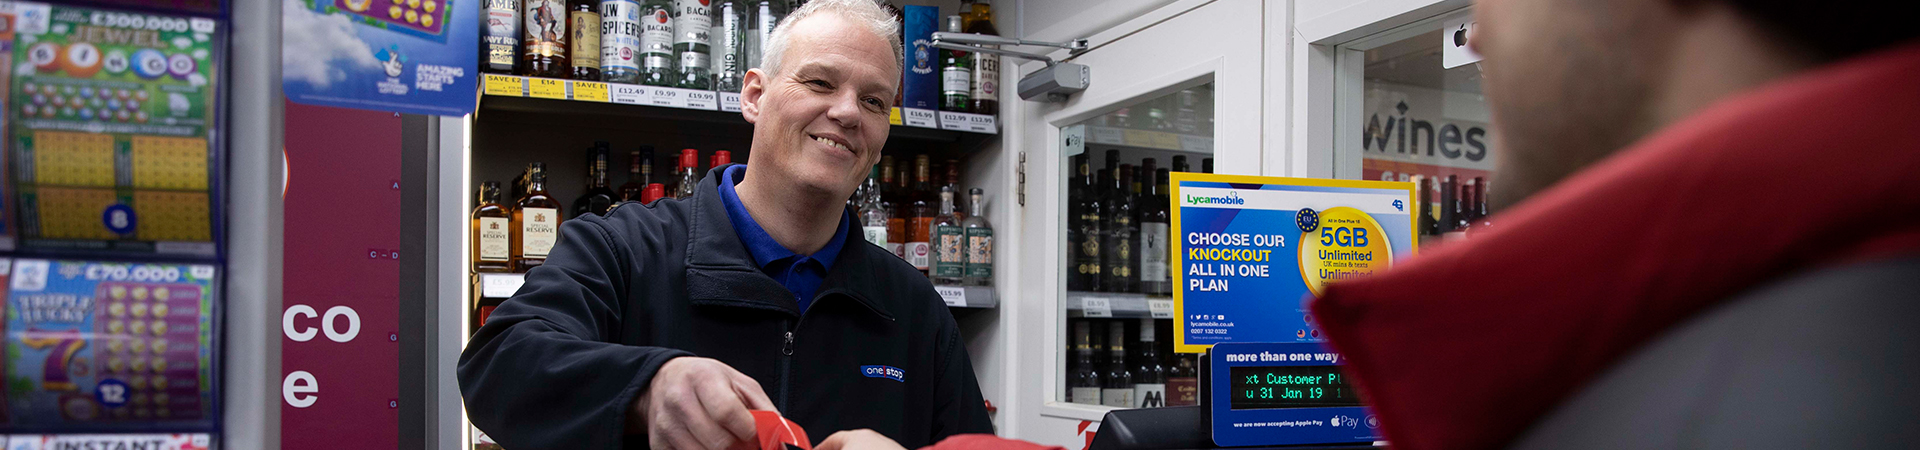 How do you optimise your convenience store to offer the perfect solution for your customers?